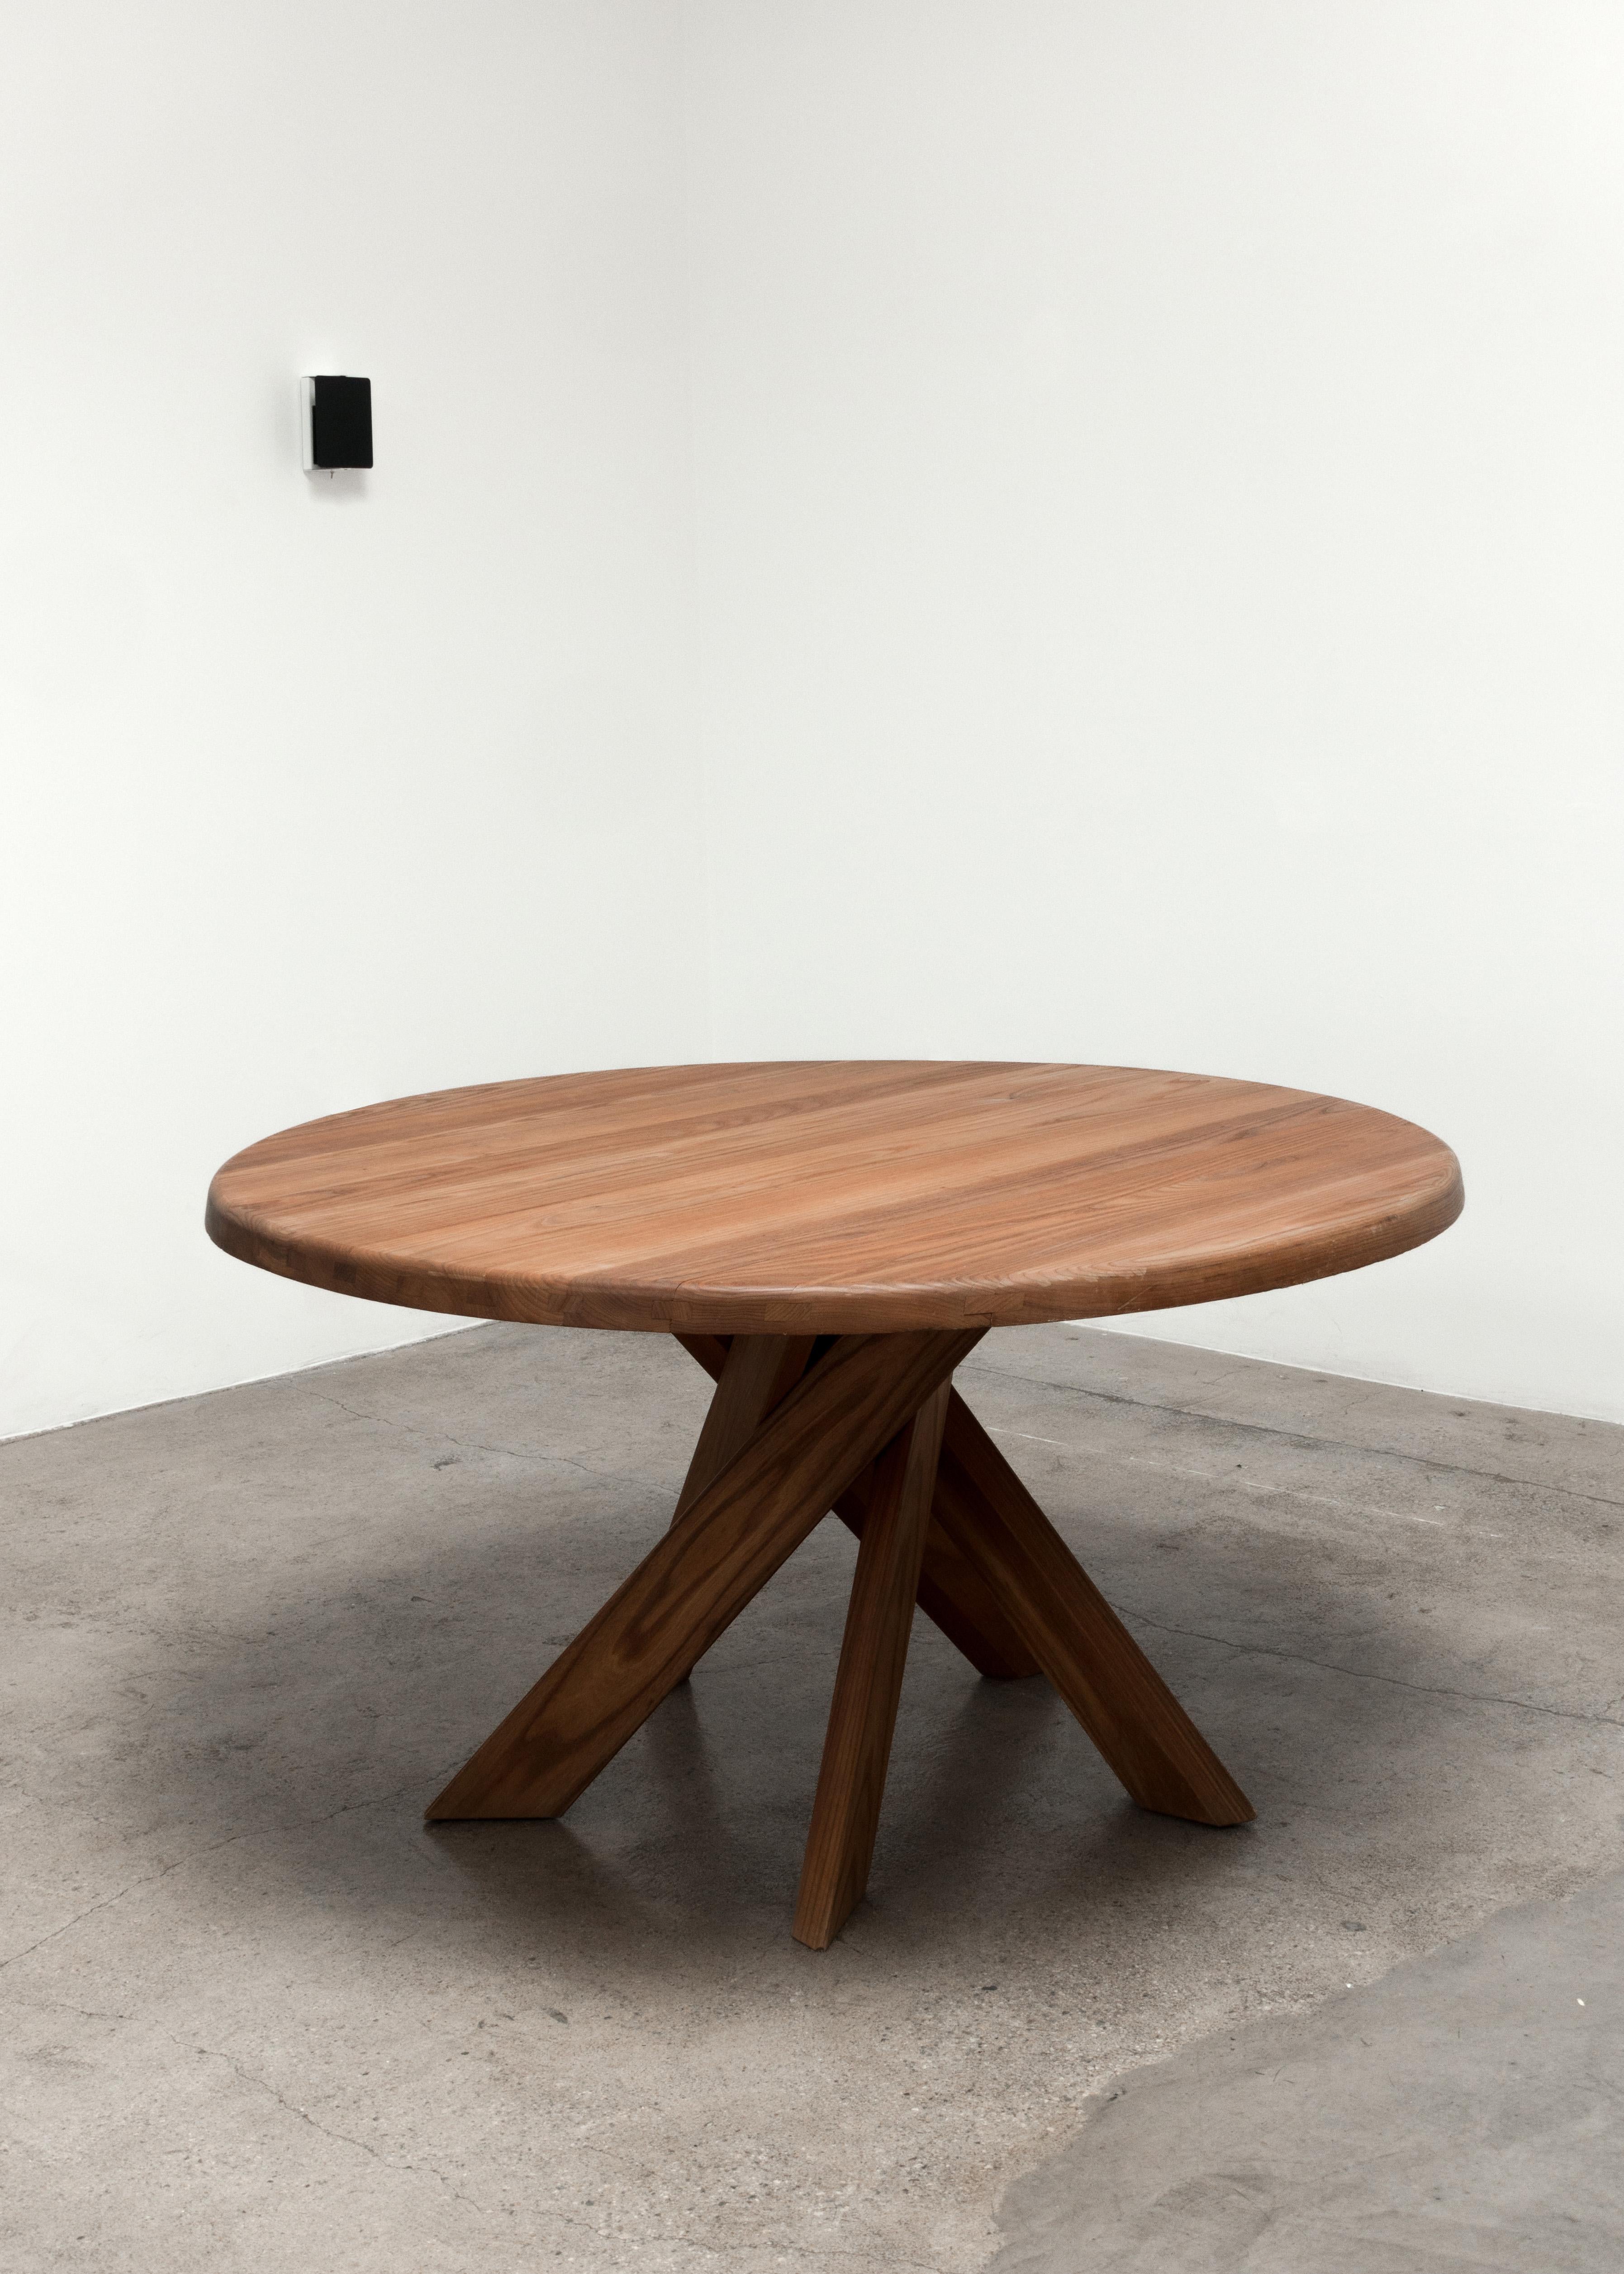 Pierre Chapo T21D Table by Chapo Creation.